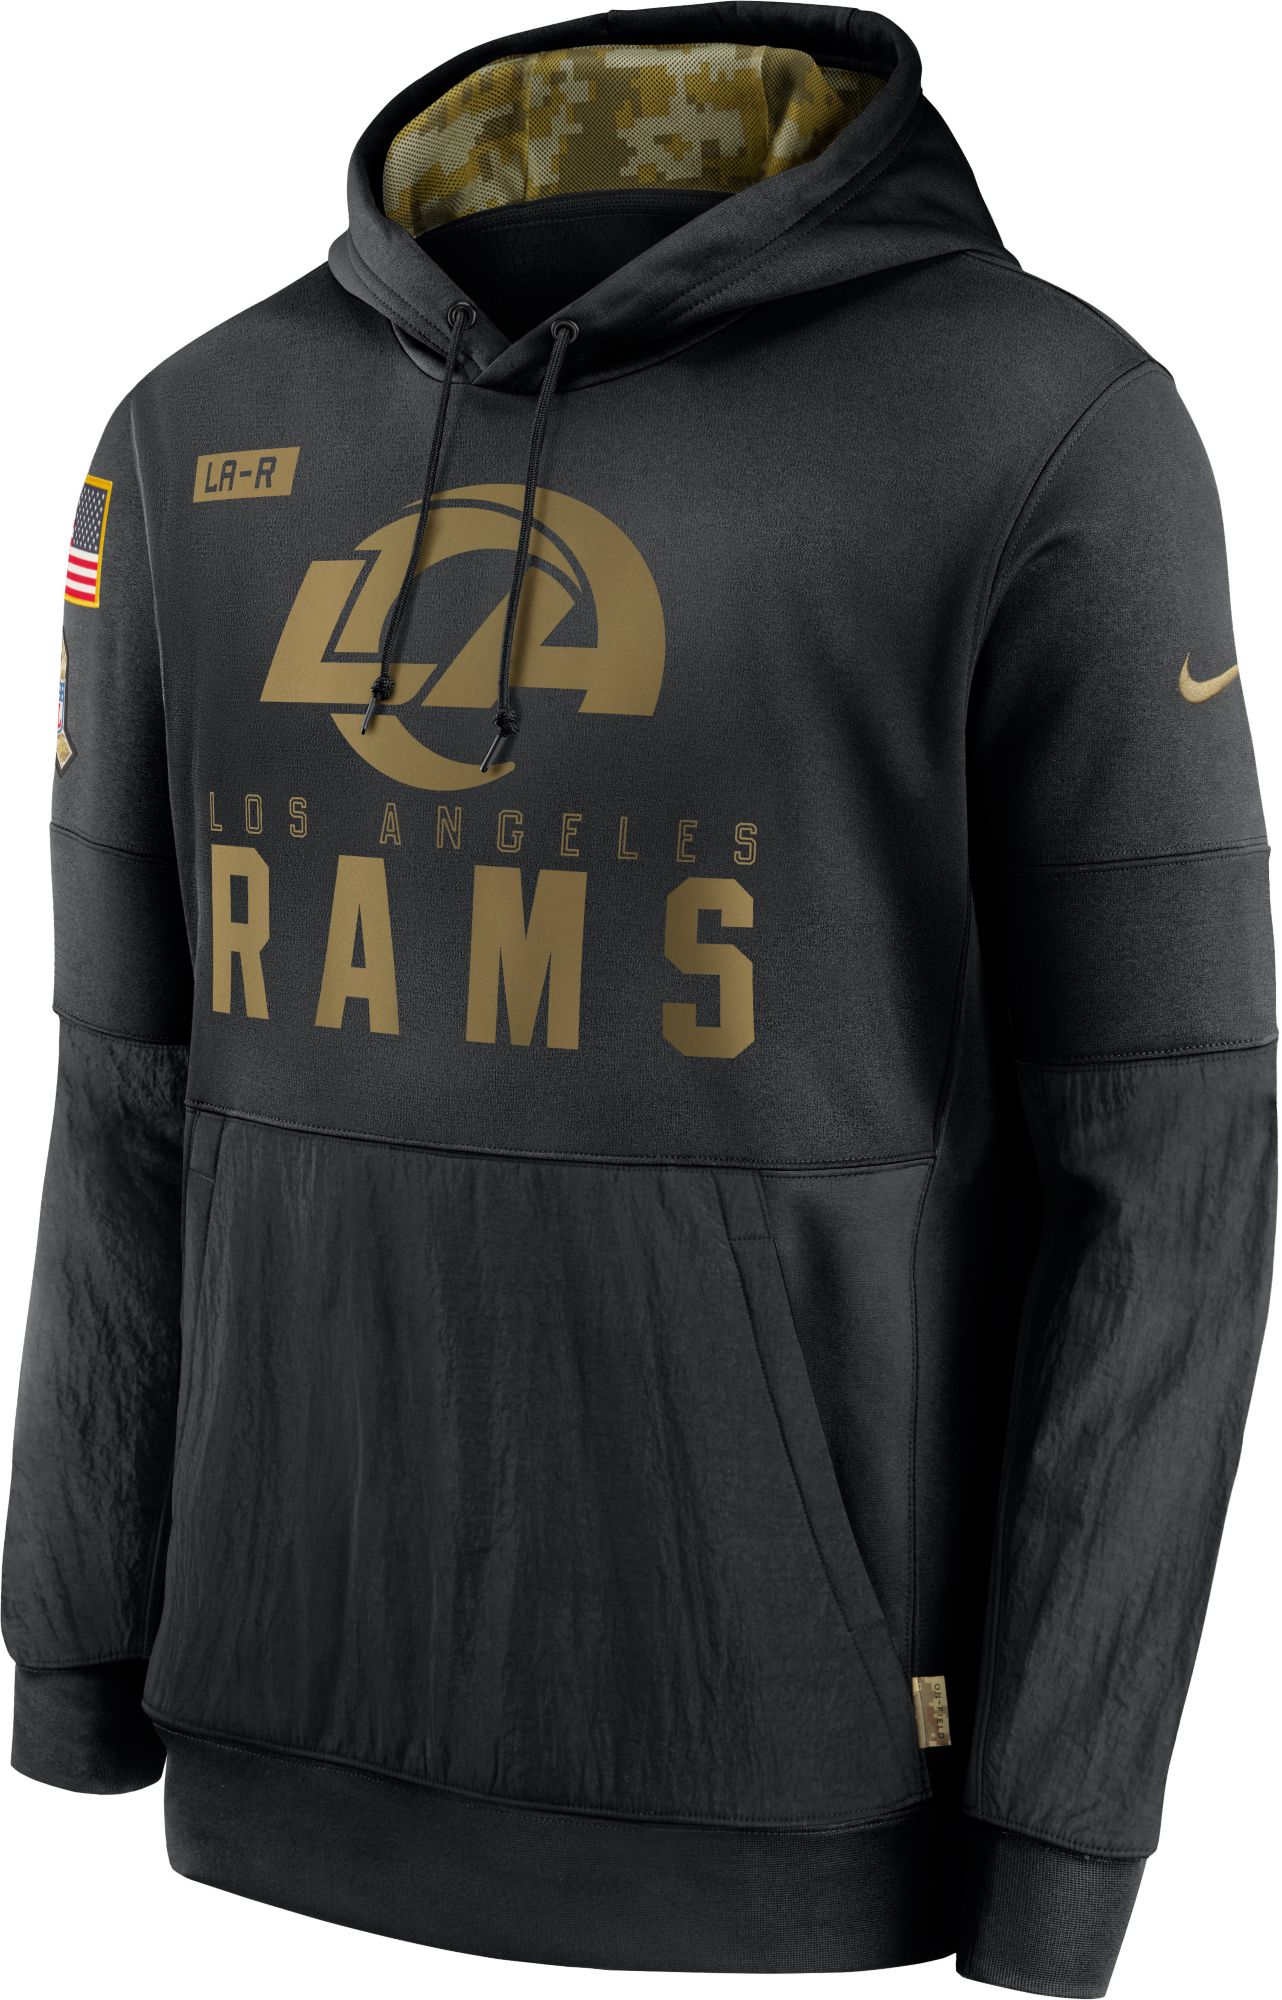 rams salute to service jacket